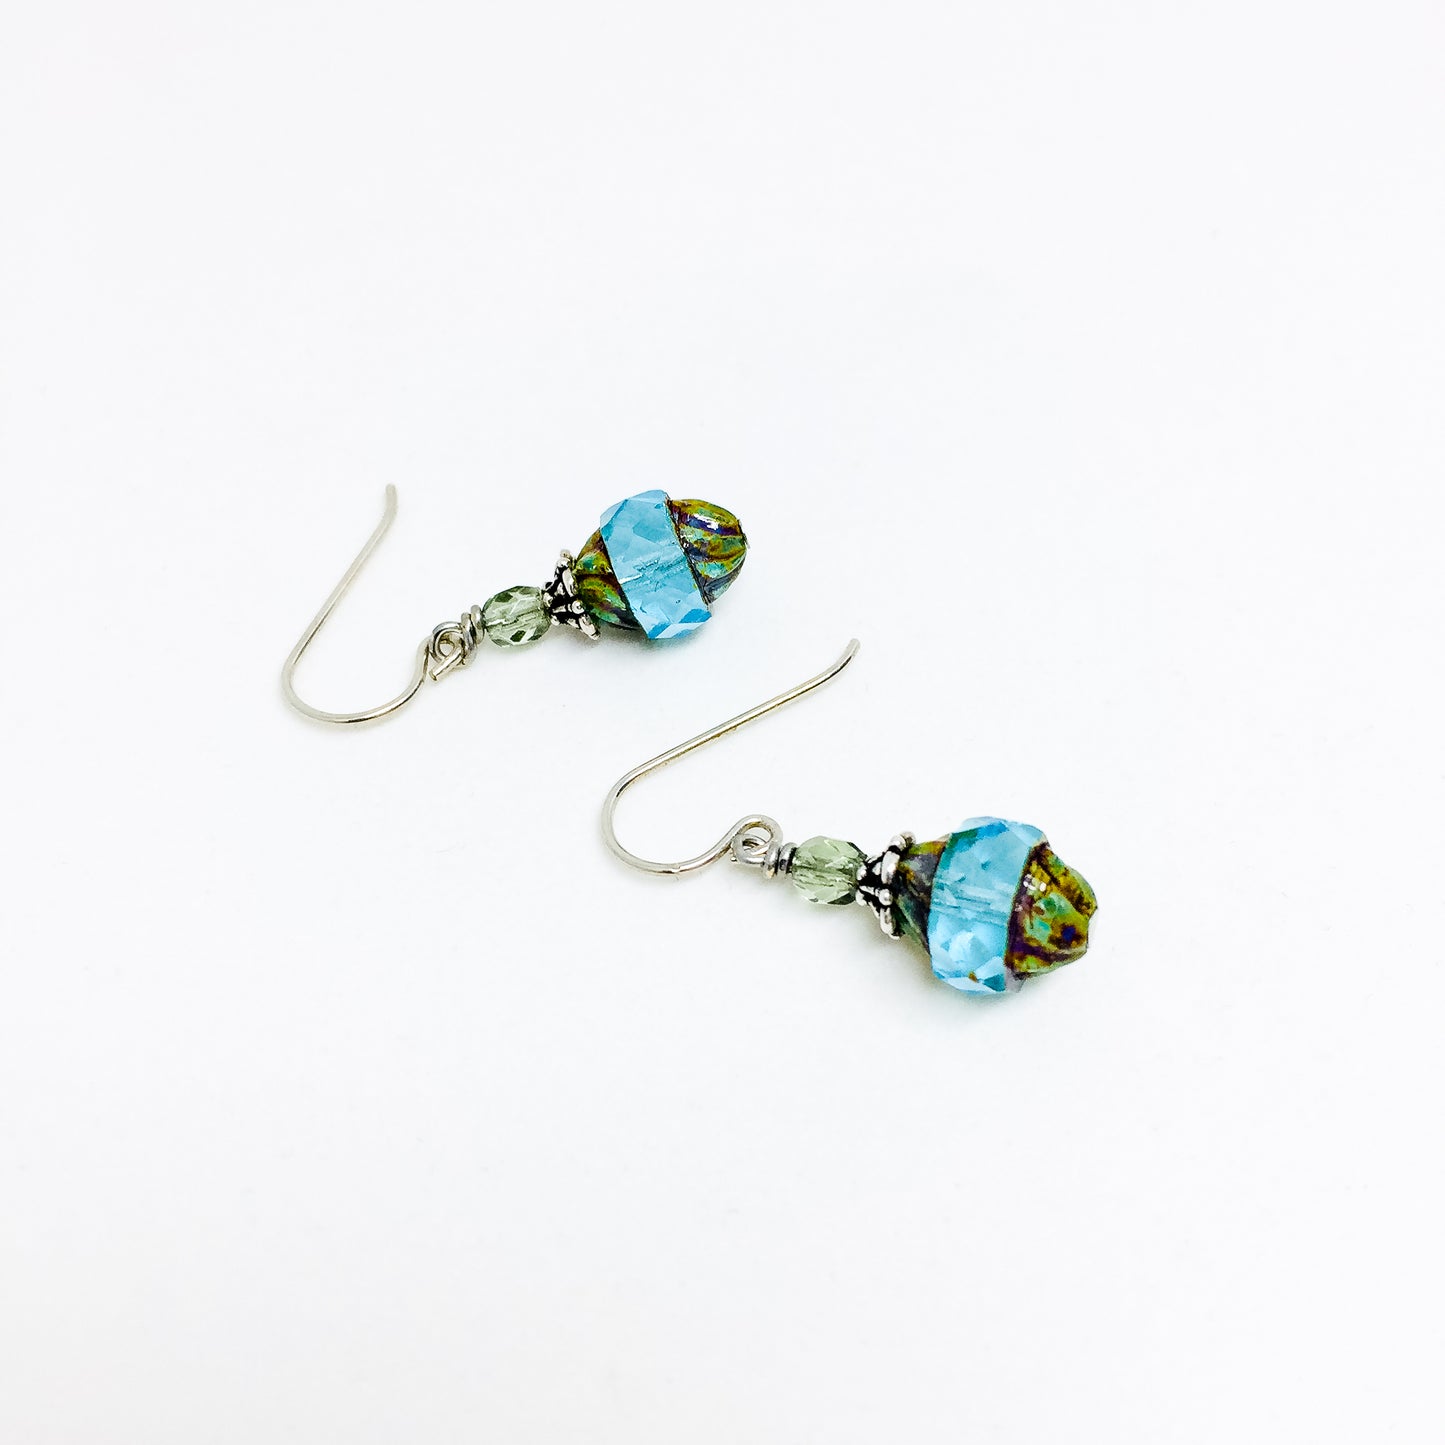 Czech glass earrings cathedral faceted band aqua